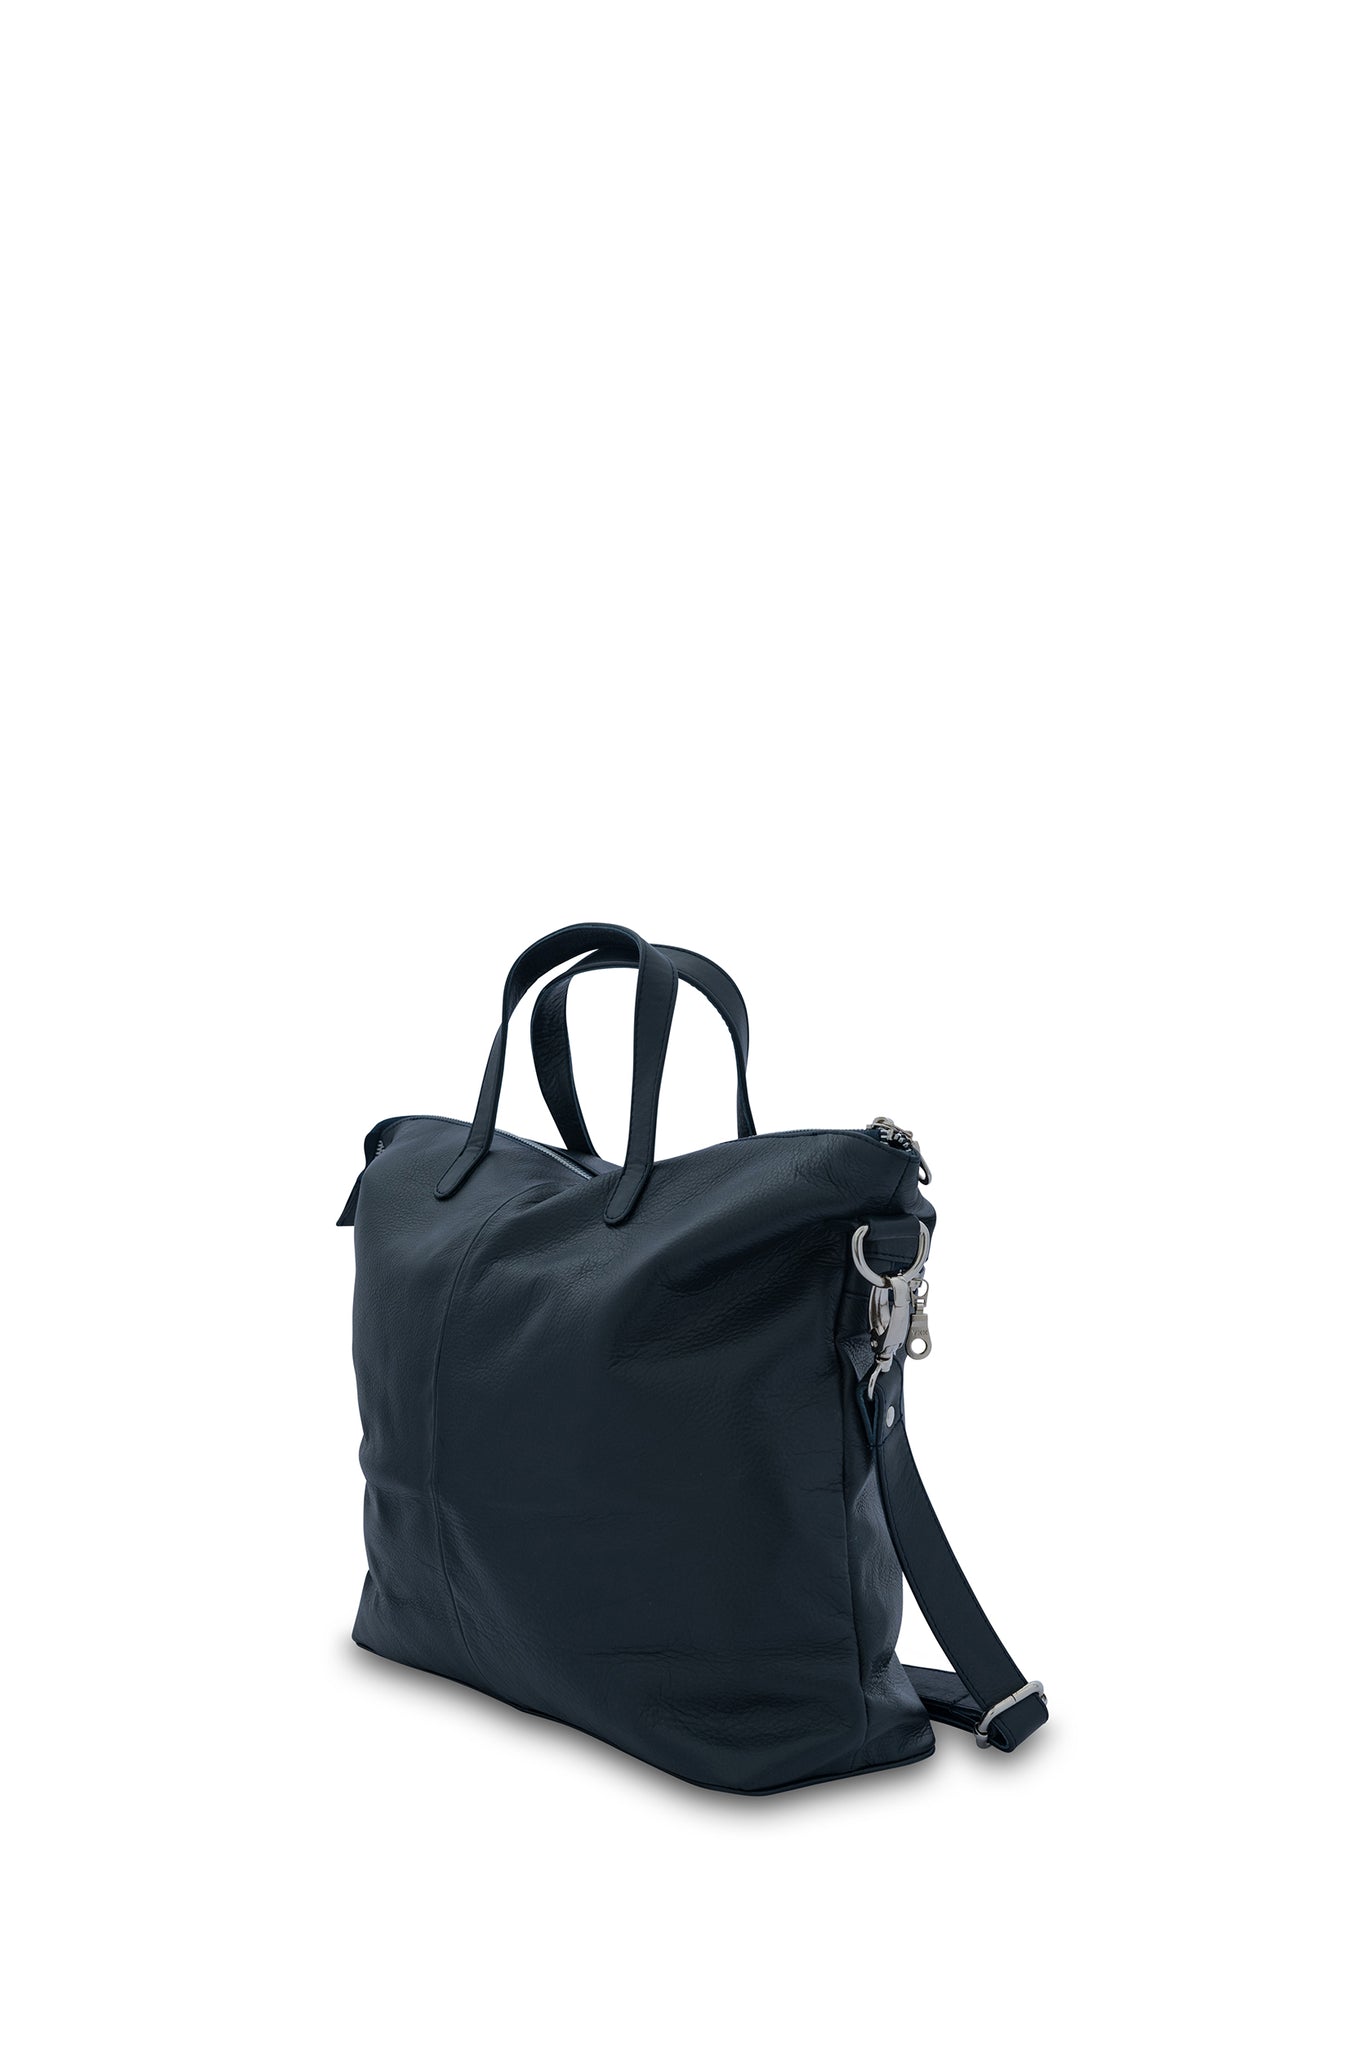 Rome Leather Tote Bag - French Navy